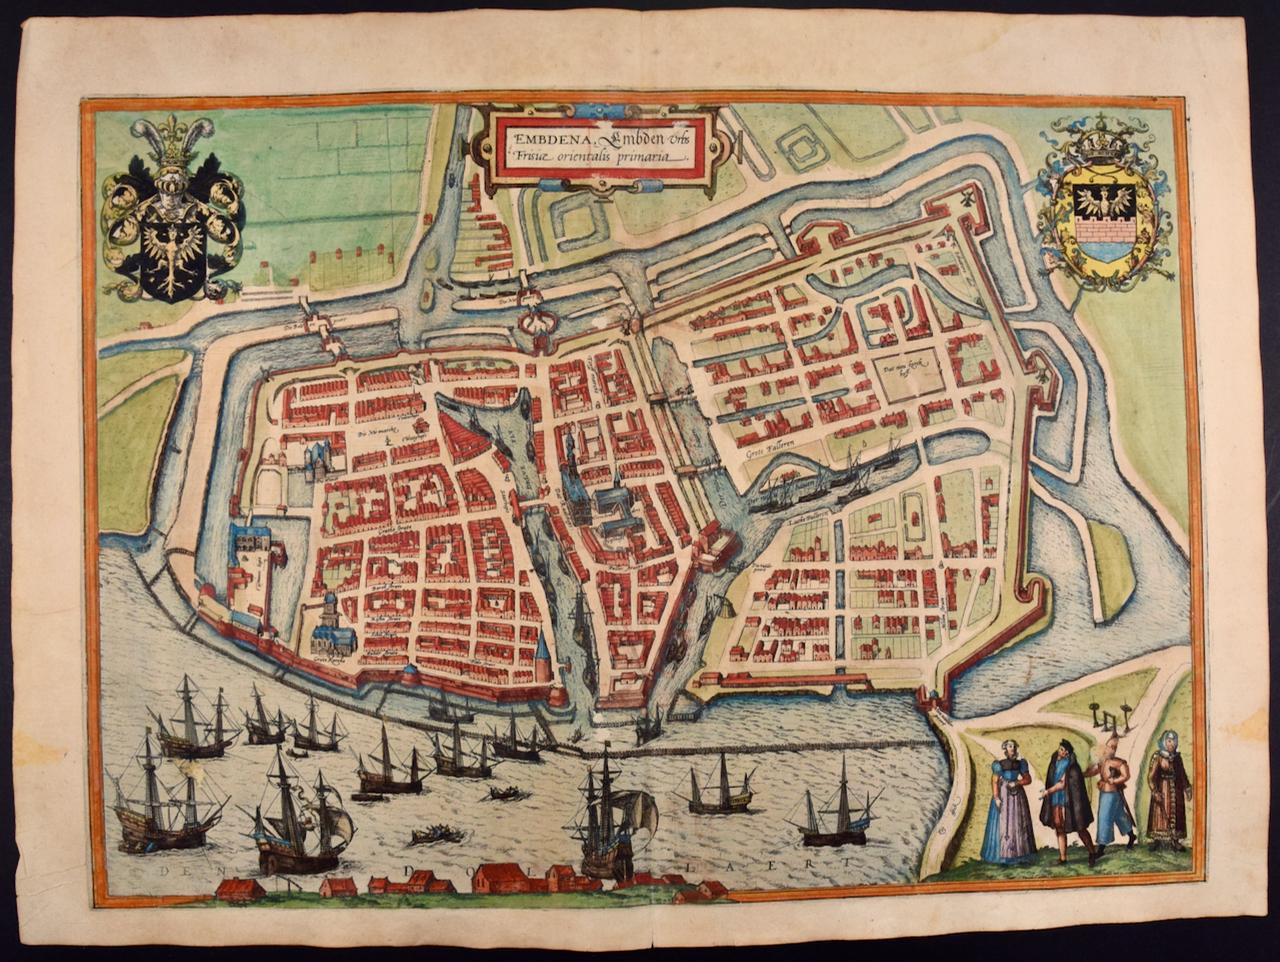 Frans Hogenberg Landscape Print -  View of Emden, Germany: A 16th Century Hand-colored Map by Braun & Hogenberg